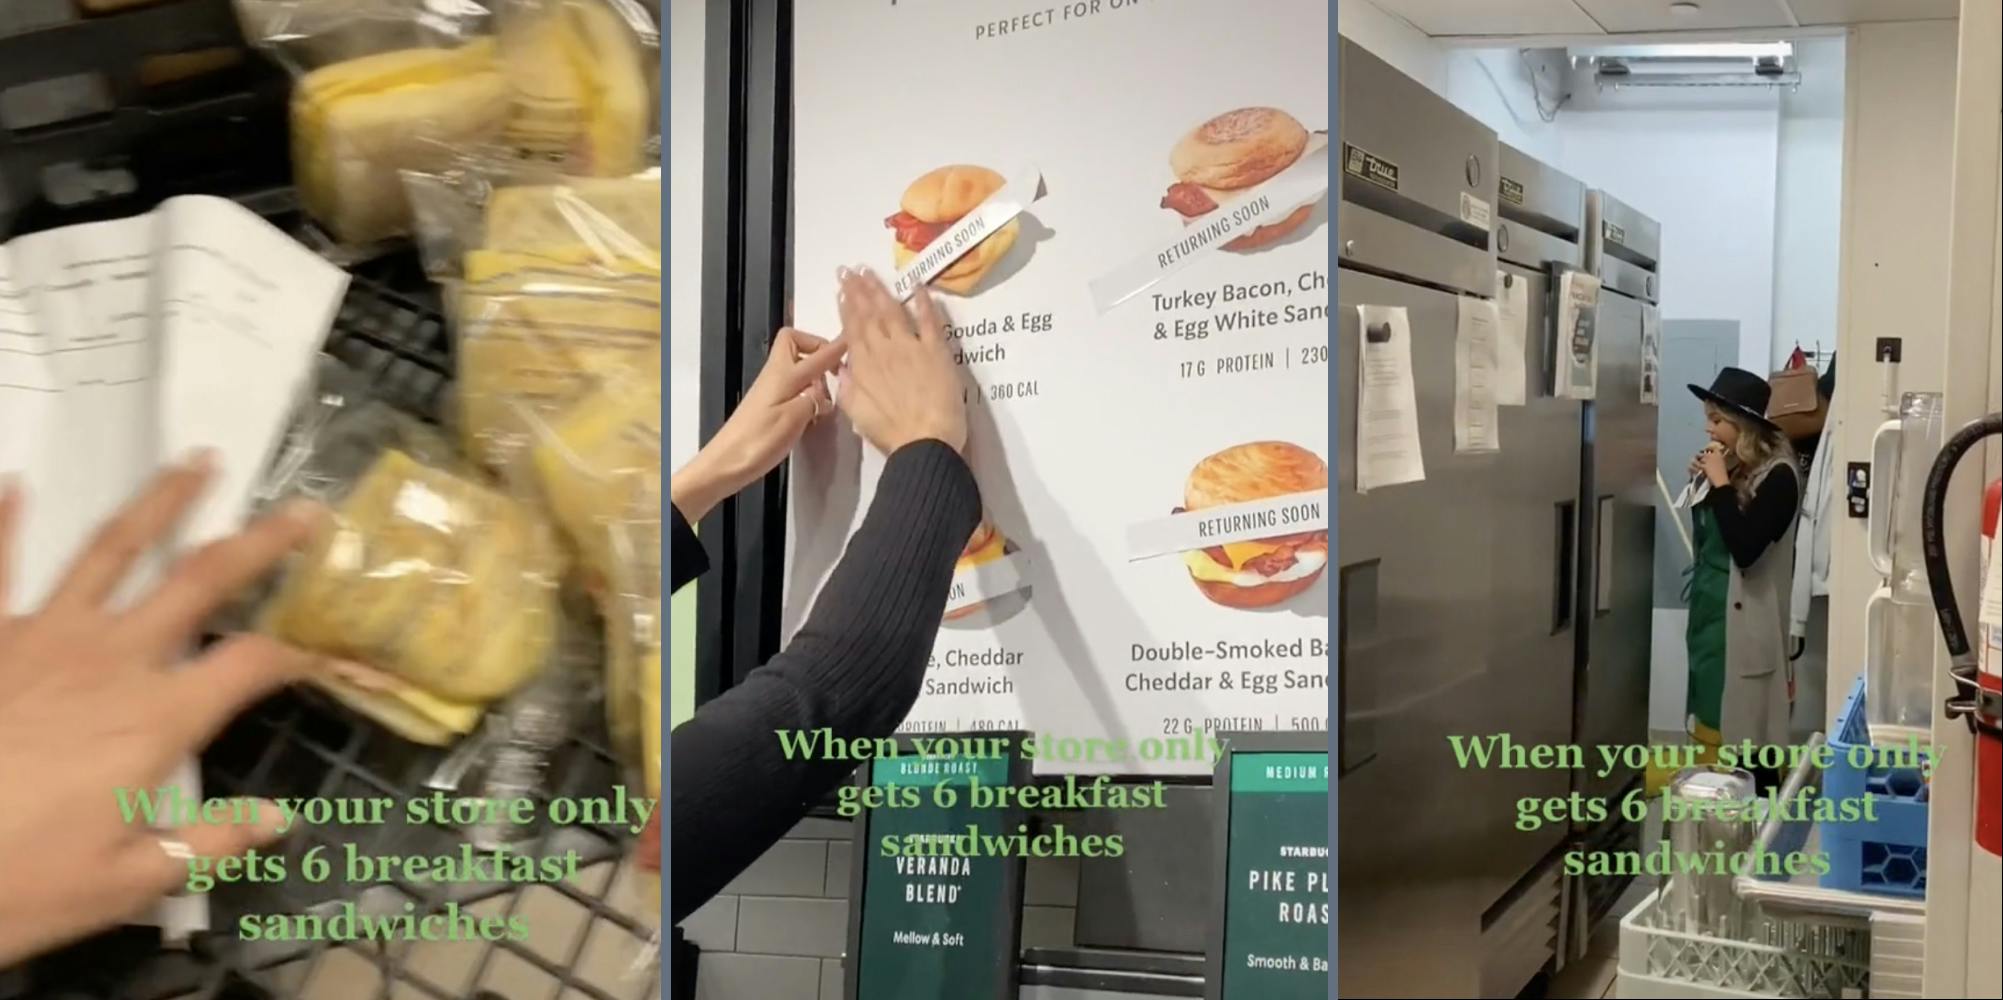 Packaged sandwiches from Starbucks. Sign advertising sandwiches. Woman eating sandwich.